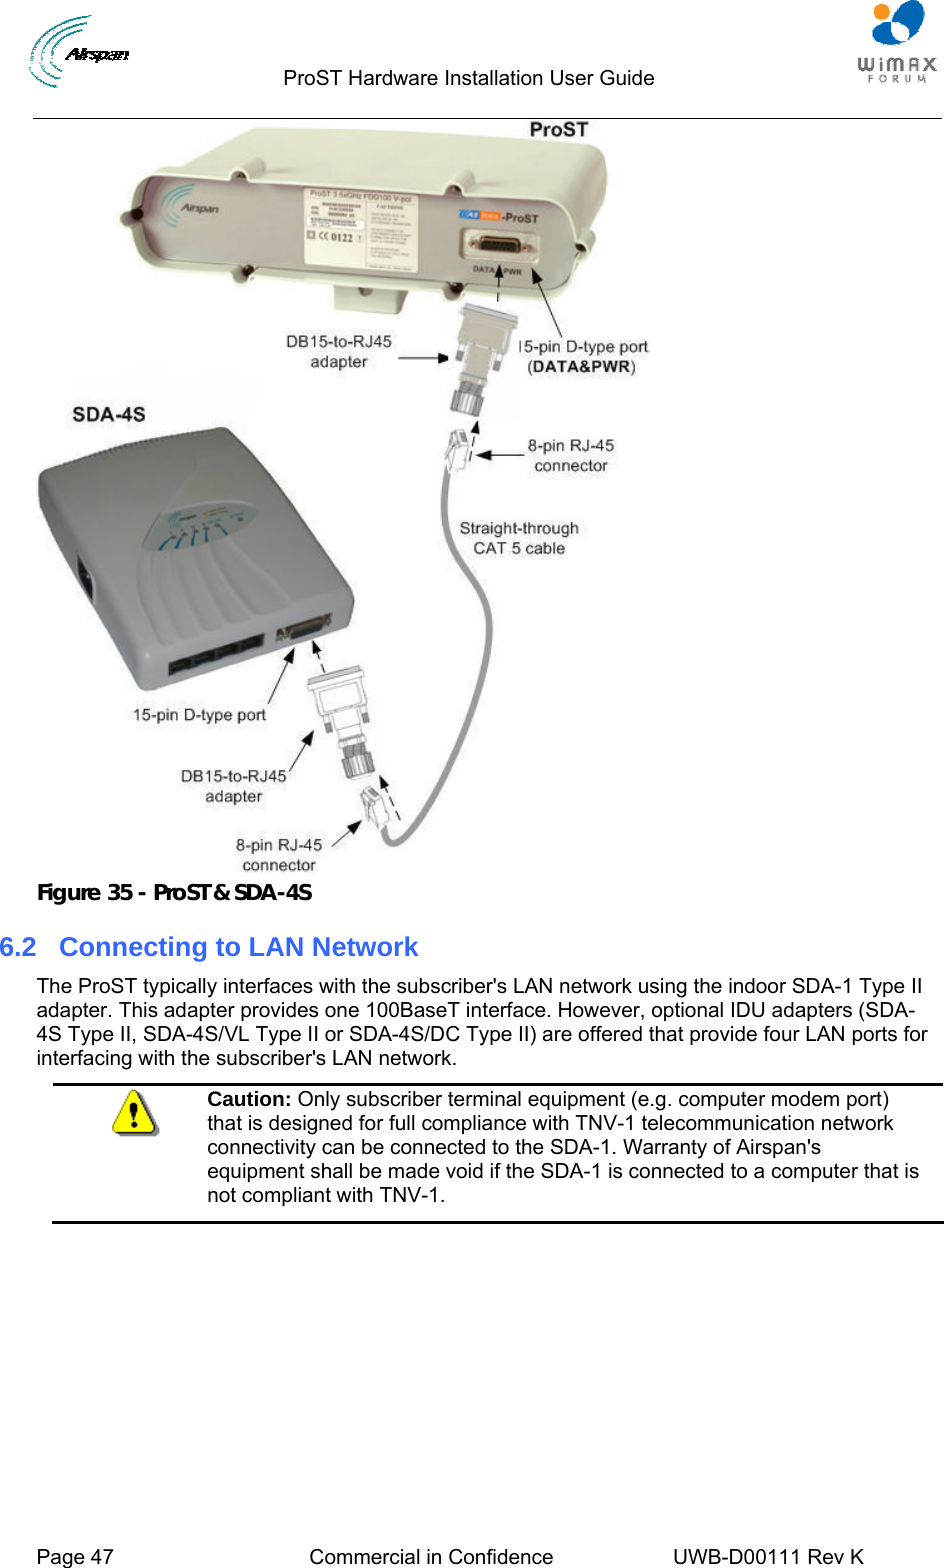                                  ProST Hardware Installation User Guide     Page 47  Commercial in Confidence  UWB-D00111 Rev K    Figure 35 - ProST &amp; SDA-4S 6.2  Connecting to LAN Network The ProST typically interfaces with the subscriber&apos;s LAN network using the indoor SDA-1 Type II adapter. This adapter provides one 100BaseT interface. However, optional IDU adapters (SDA-4S Type II, SDA-4S/VL Type II or SDA-4S/DC Type II) are offered that provide four LAN ports for interfacing with the subscriber&apos;s LAN network.  Caution: Only subscriber terminal equipment (e.g. computer modem port) that is designed for full compliance with TNV-1 telecommunication network connectivity can be connected to the SDA-1. Warranty of Airspan&apos;s equipment shall be made void if the SDA-1 is connected to a computer that is not compliant with TNV-1.  